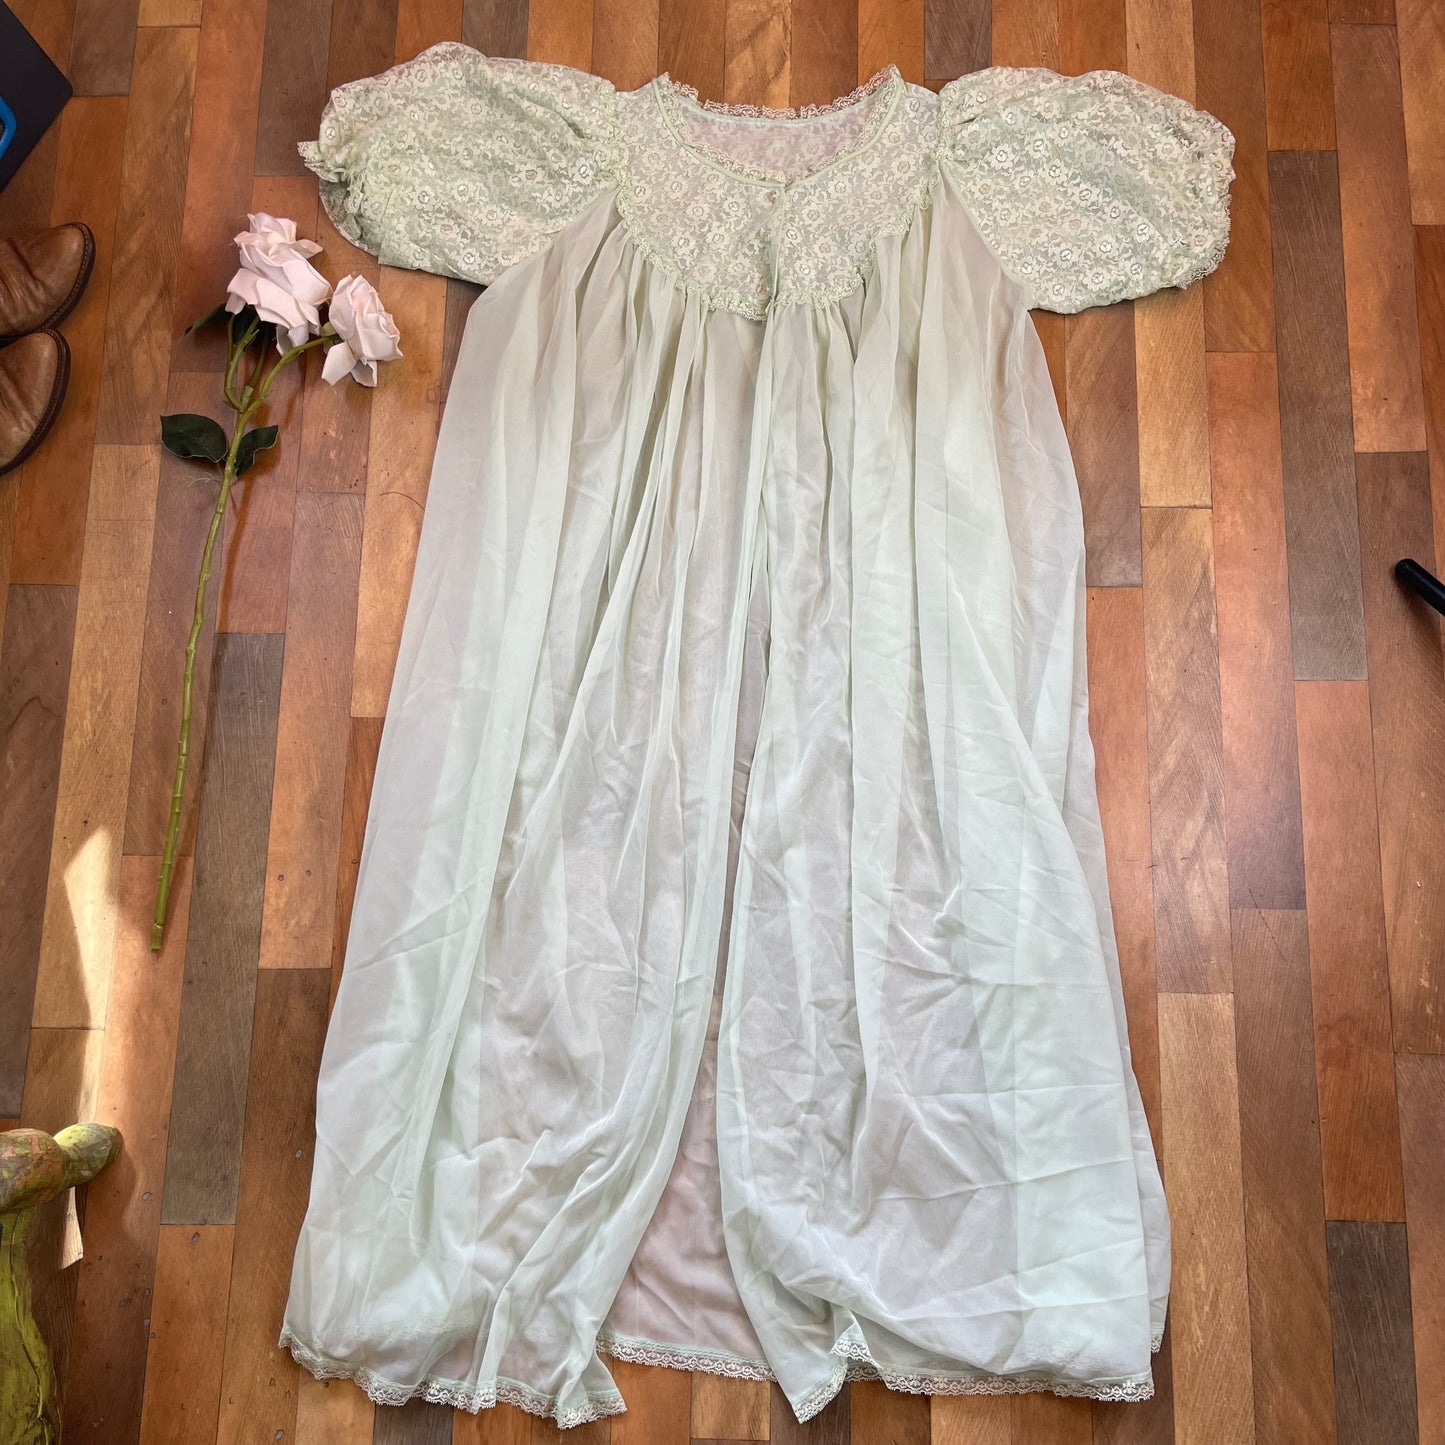 VINTAGE 60’S RUFFLED SHOULDER NIGHTGOWN